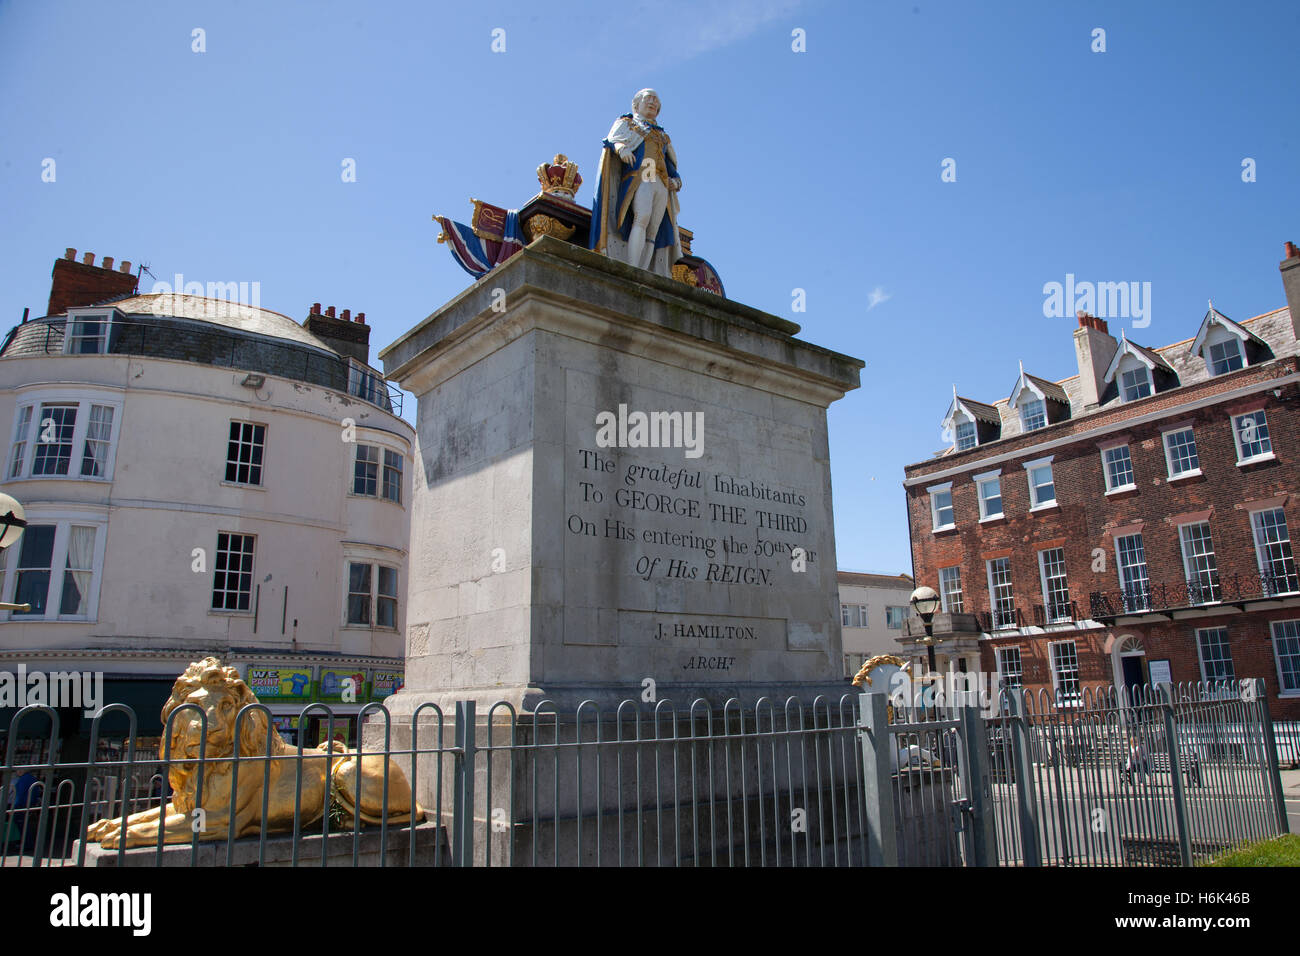 Statue of King George third 3rd in Weymouth, erected to celebrate him entering the 50th year of his reign Stock Photo